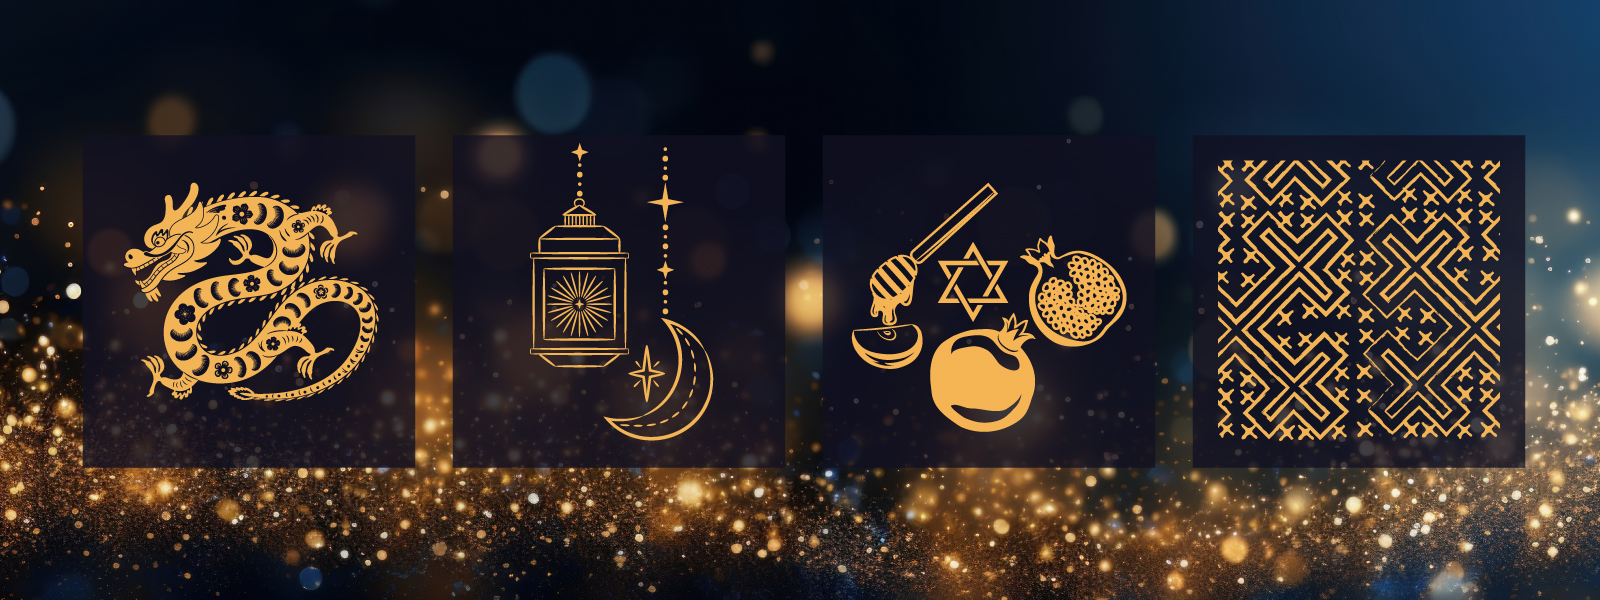 A gold and black design with various illustrated graphics, including a dragon, a lamp and moon, a pomegranate and Star of David, and a geometric pattern.